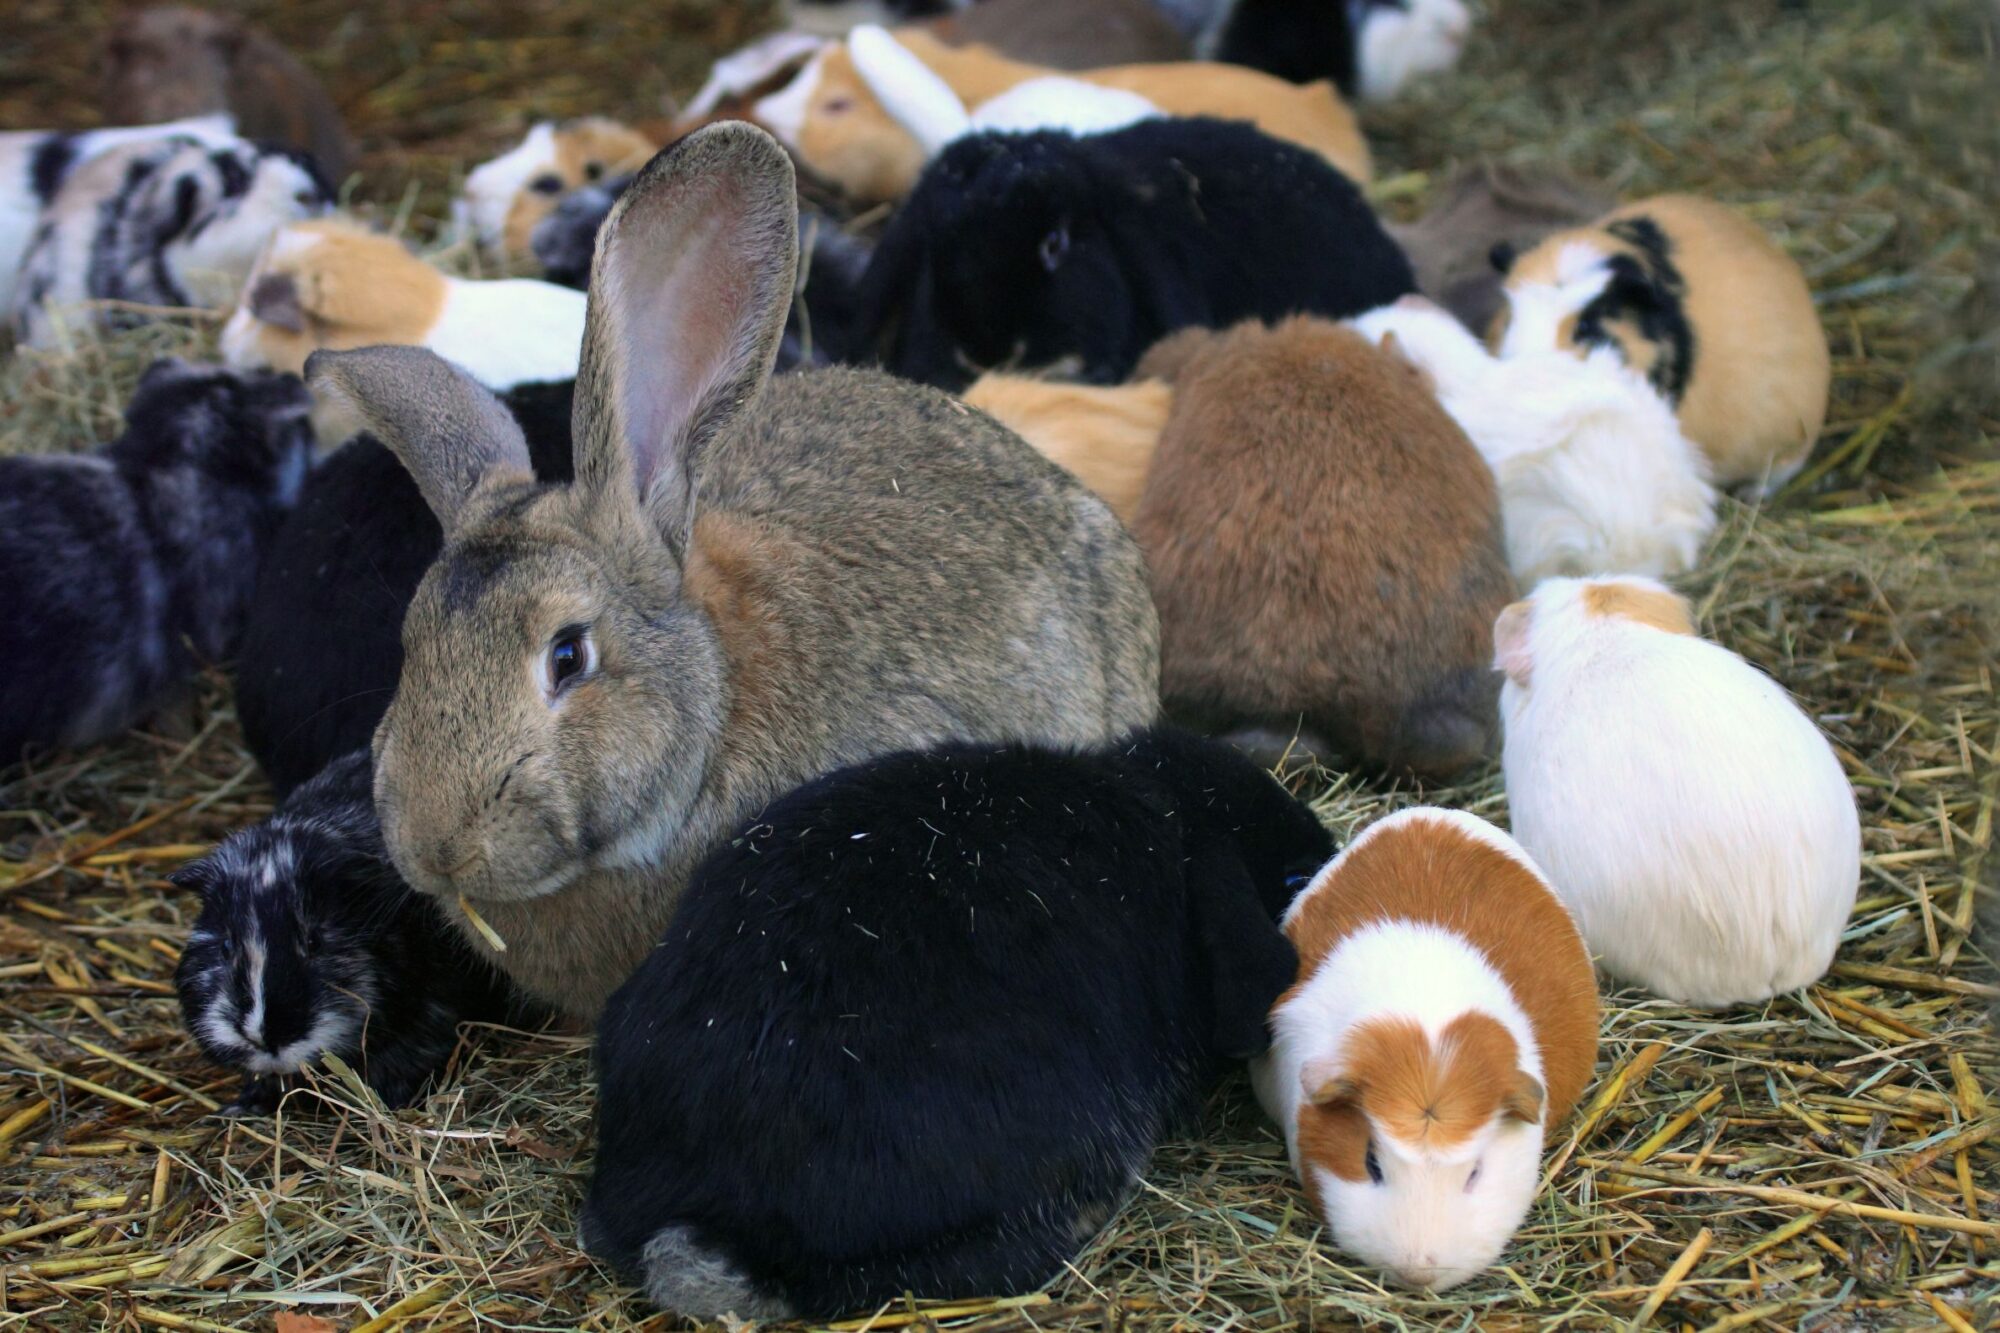 bunny and guinea pigs eating hay together.